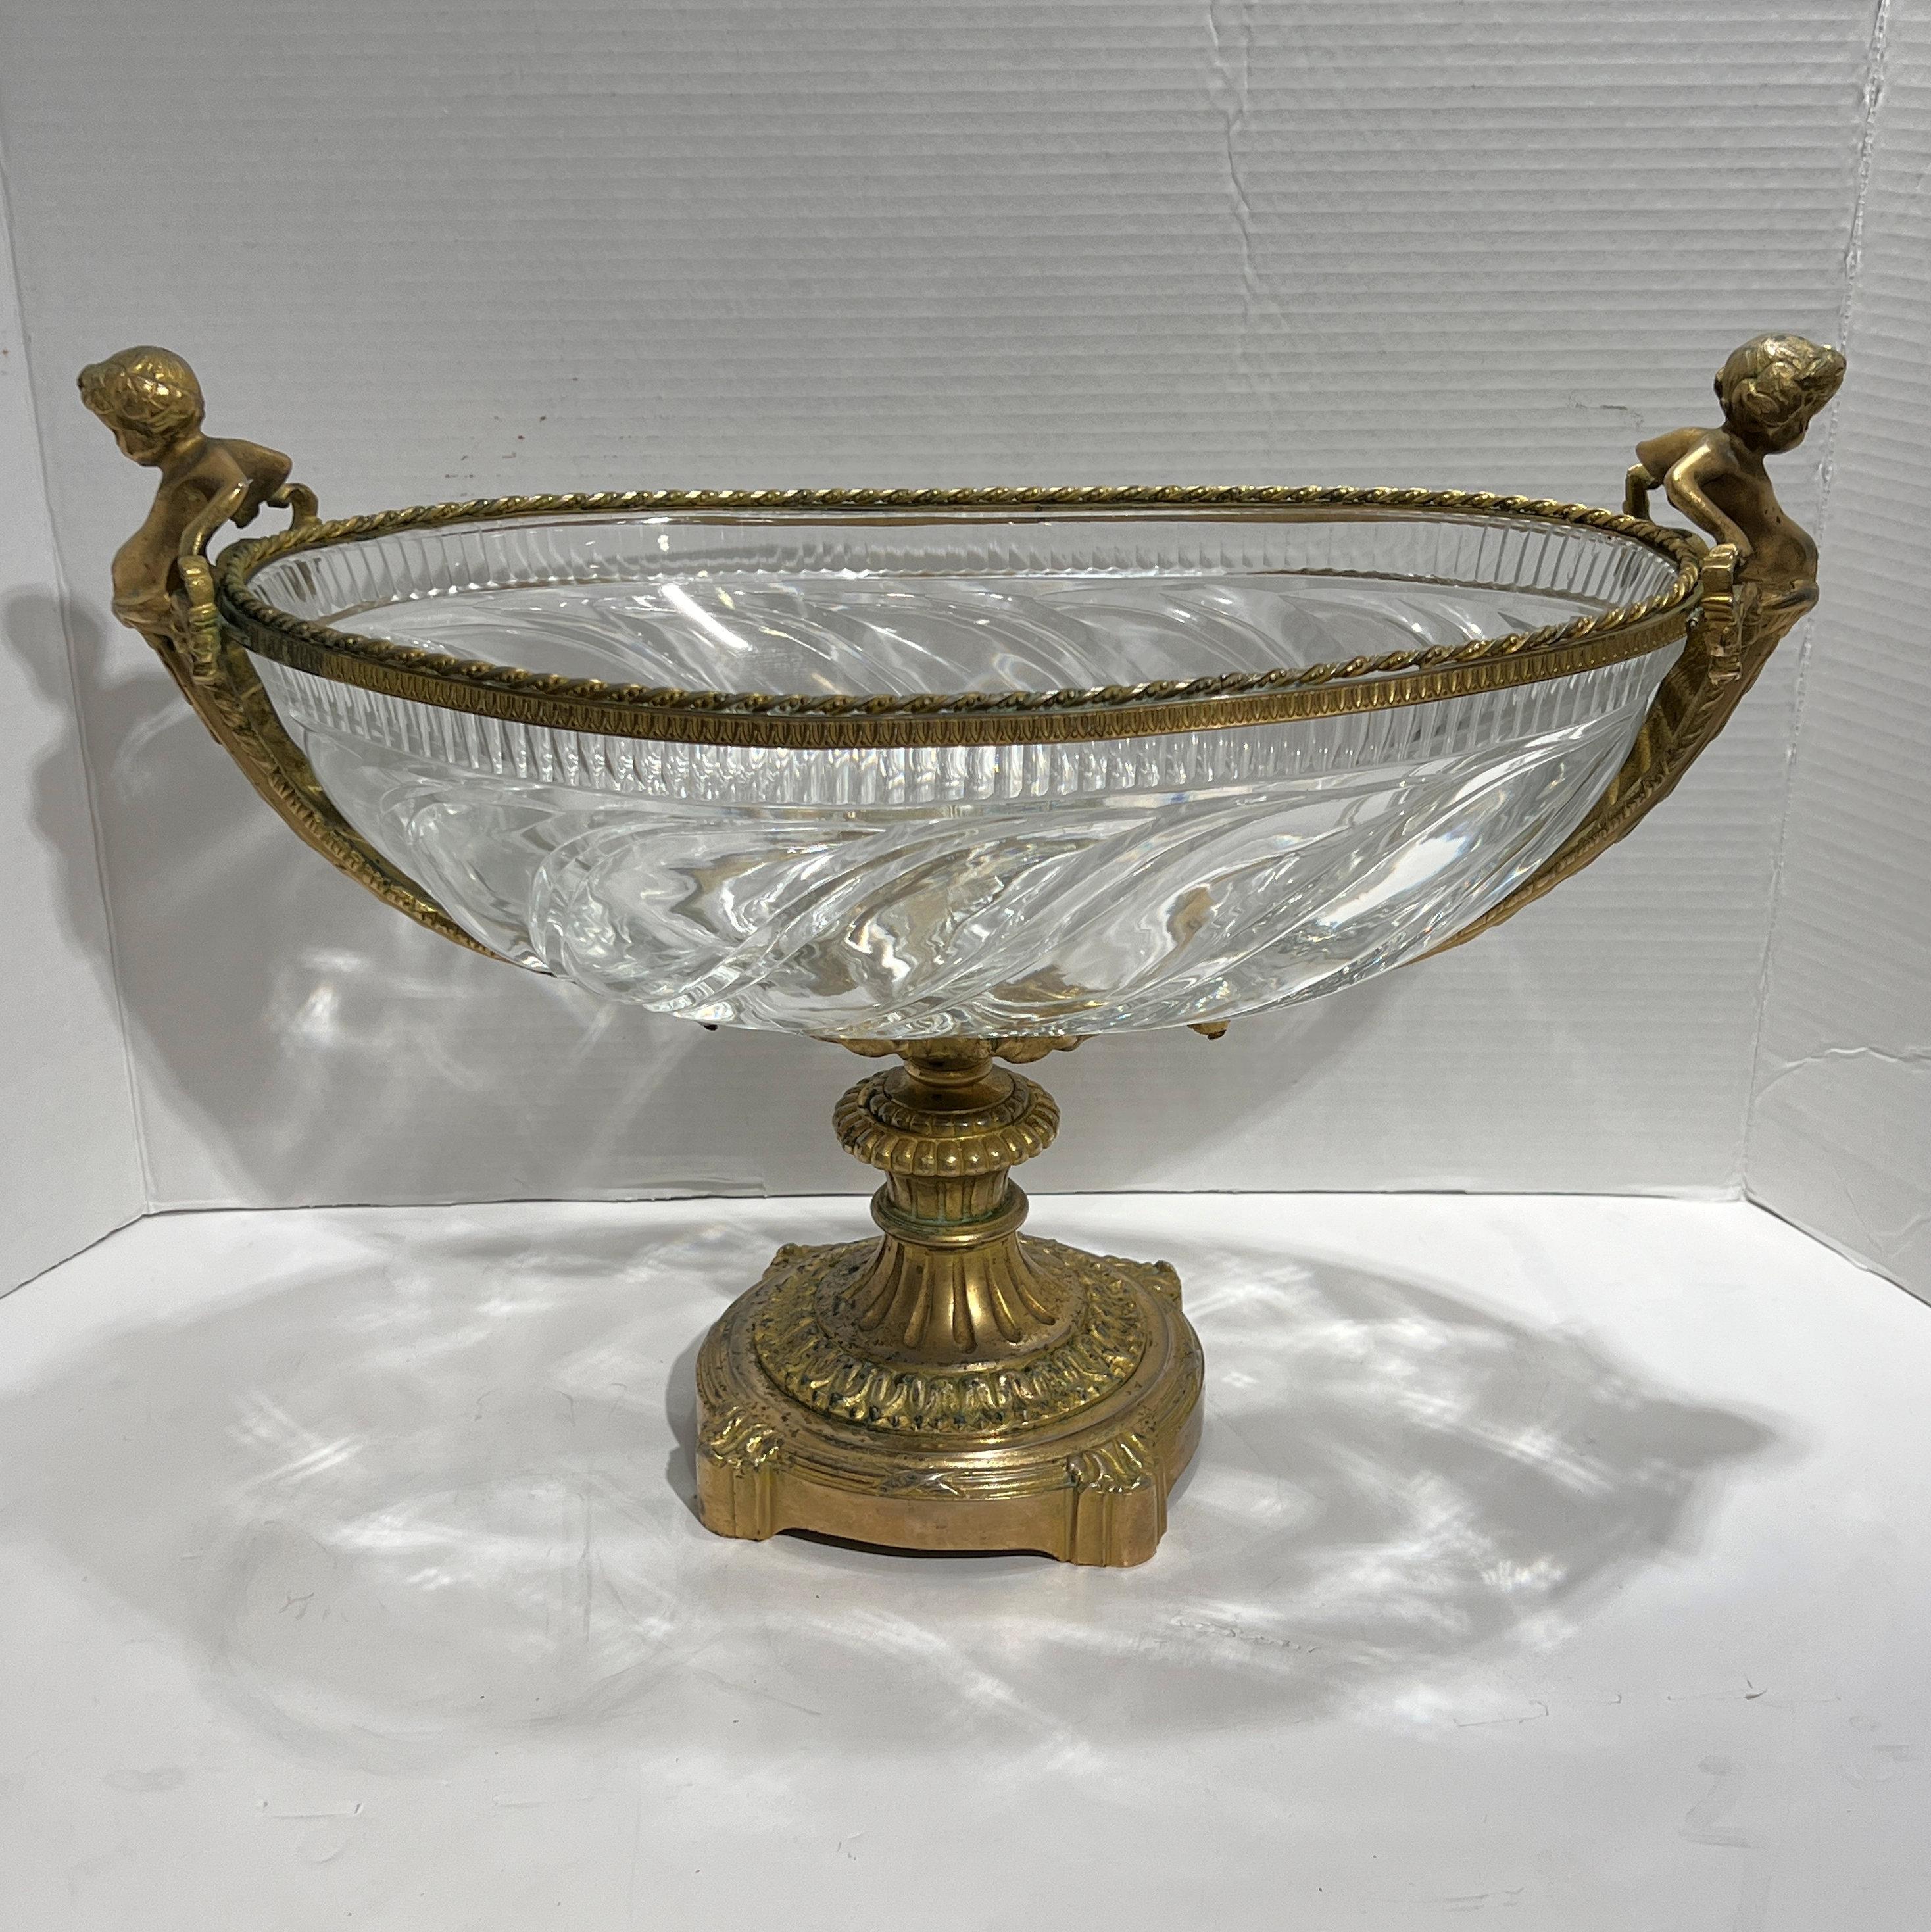 Antique (19th century) French centerpiece bowl in the Louis XVI neoclassical style with an exceptional molded crystal bowl with elegant gadrooned designs, with gilt bronze frame including cherub handles and single footed base.  Apparently unsigned. 